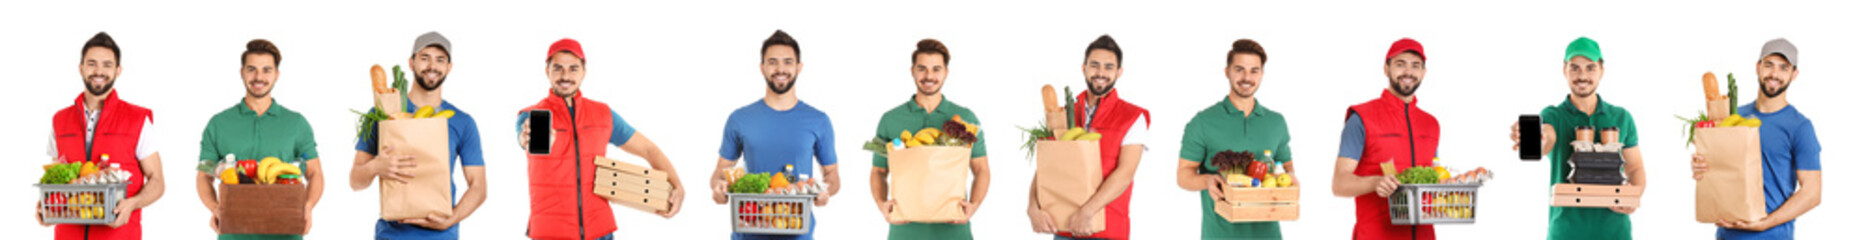 Collage of couriers with orders on white background. Food delivery